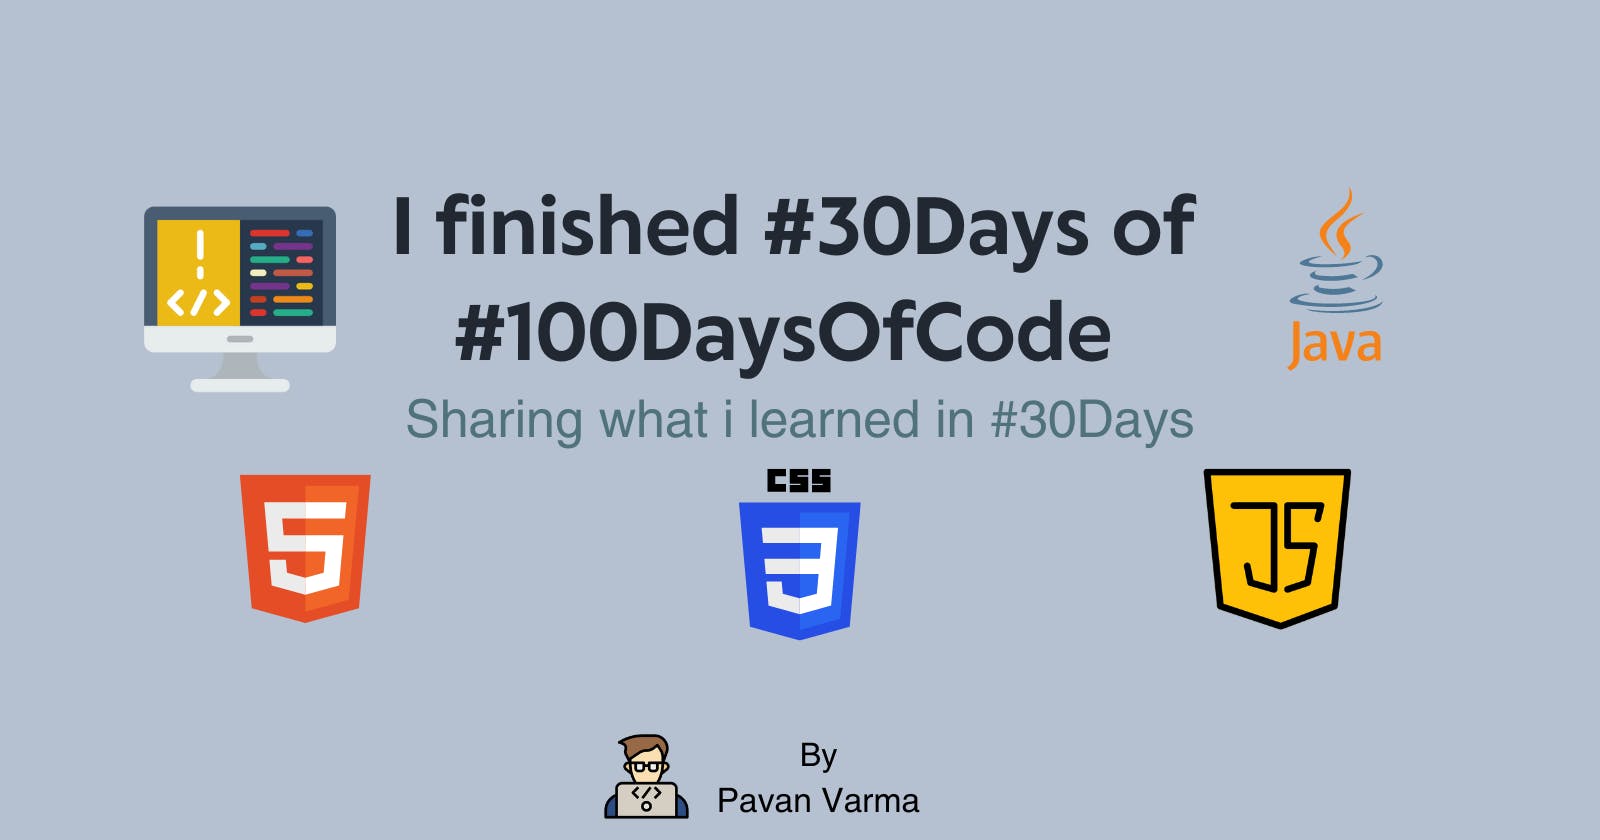 After Completing #30Days of #100DaysOfCode: Key Learnings Revealed